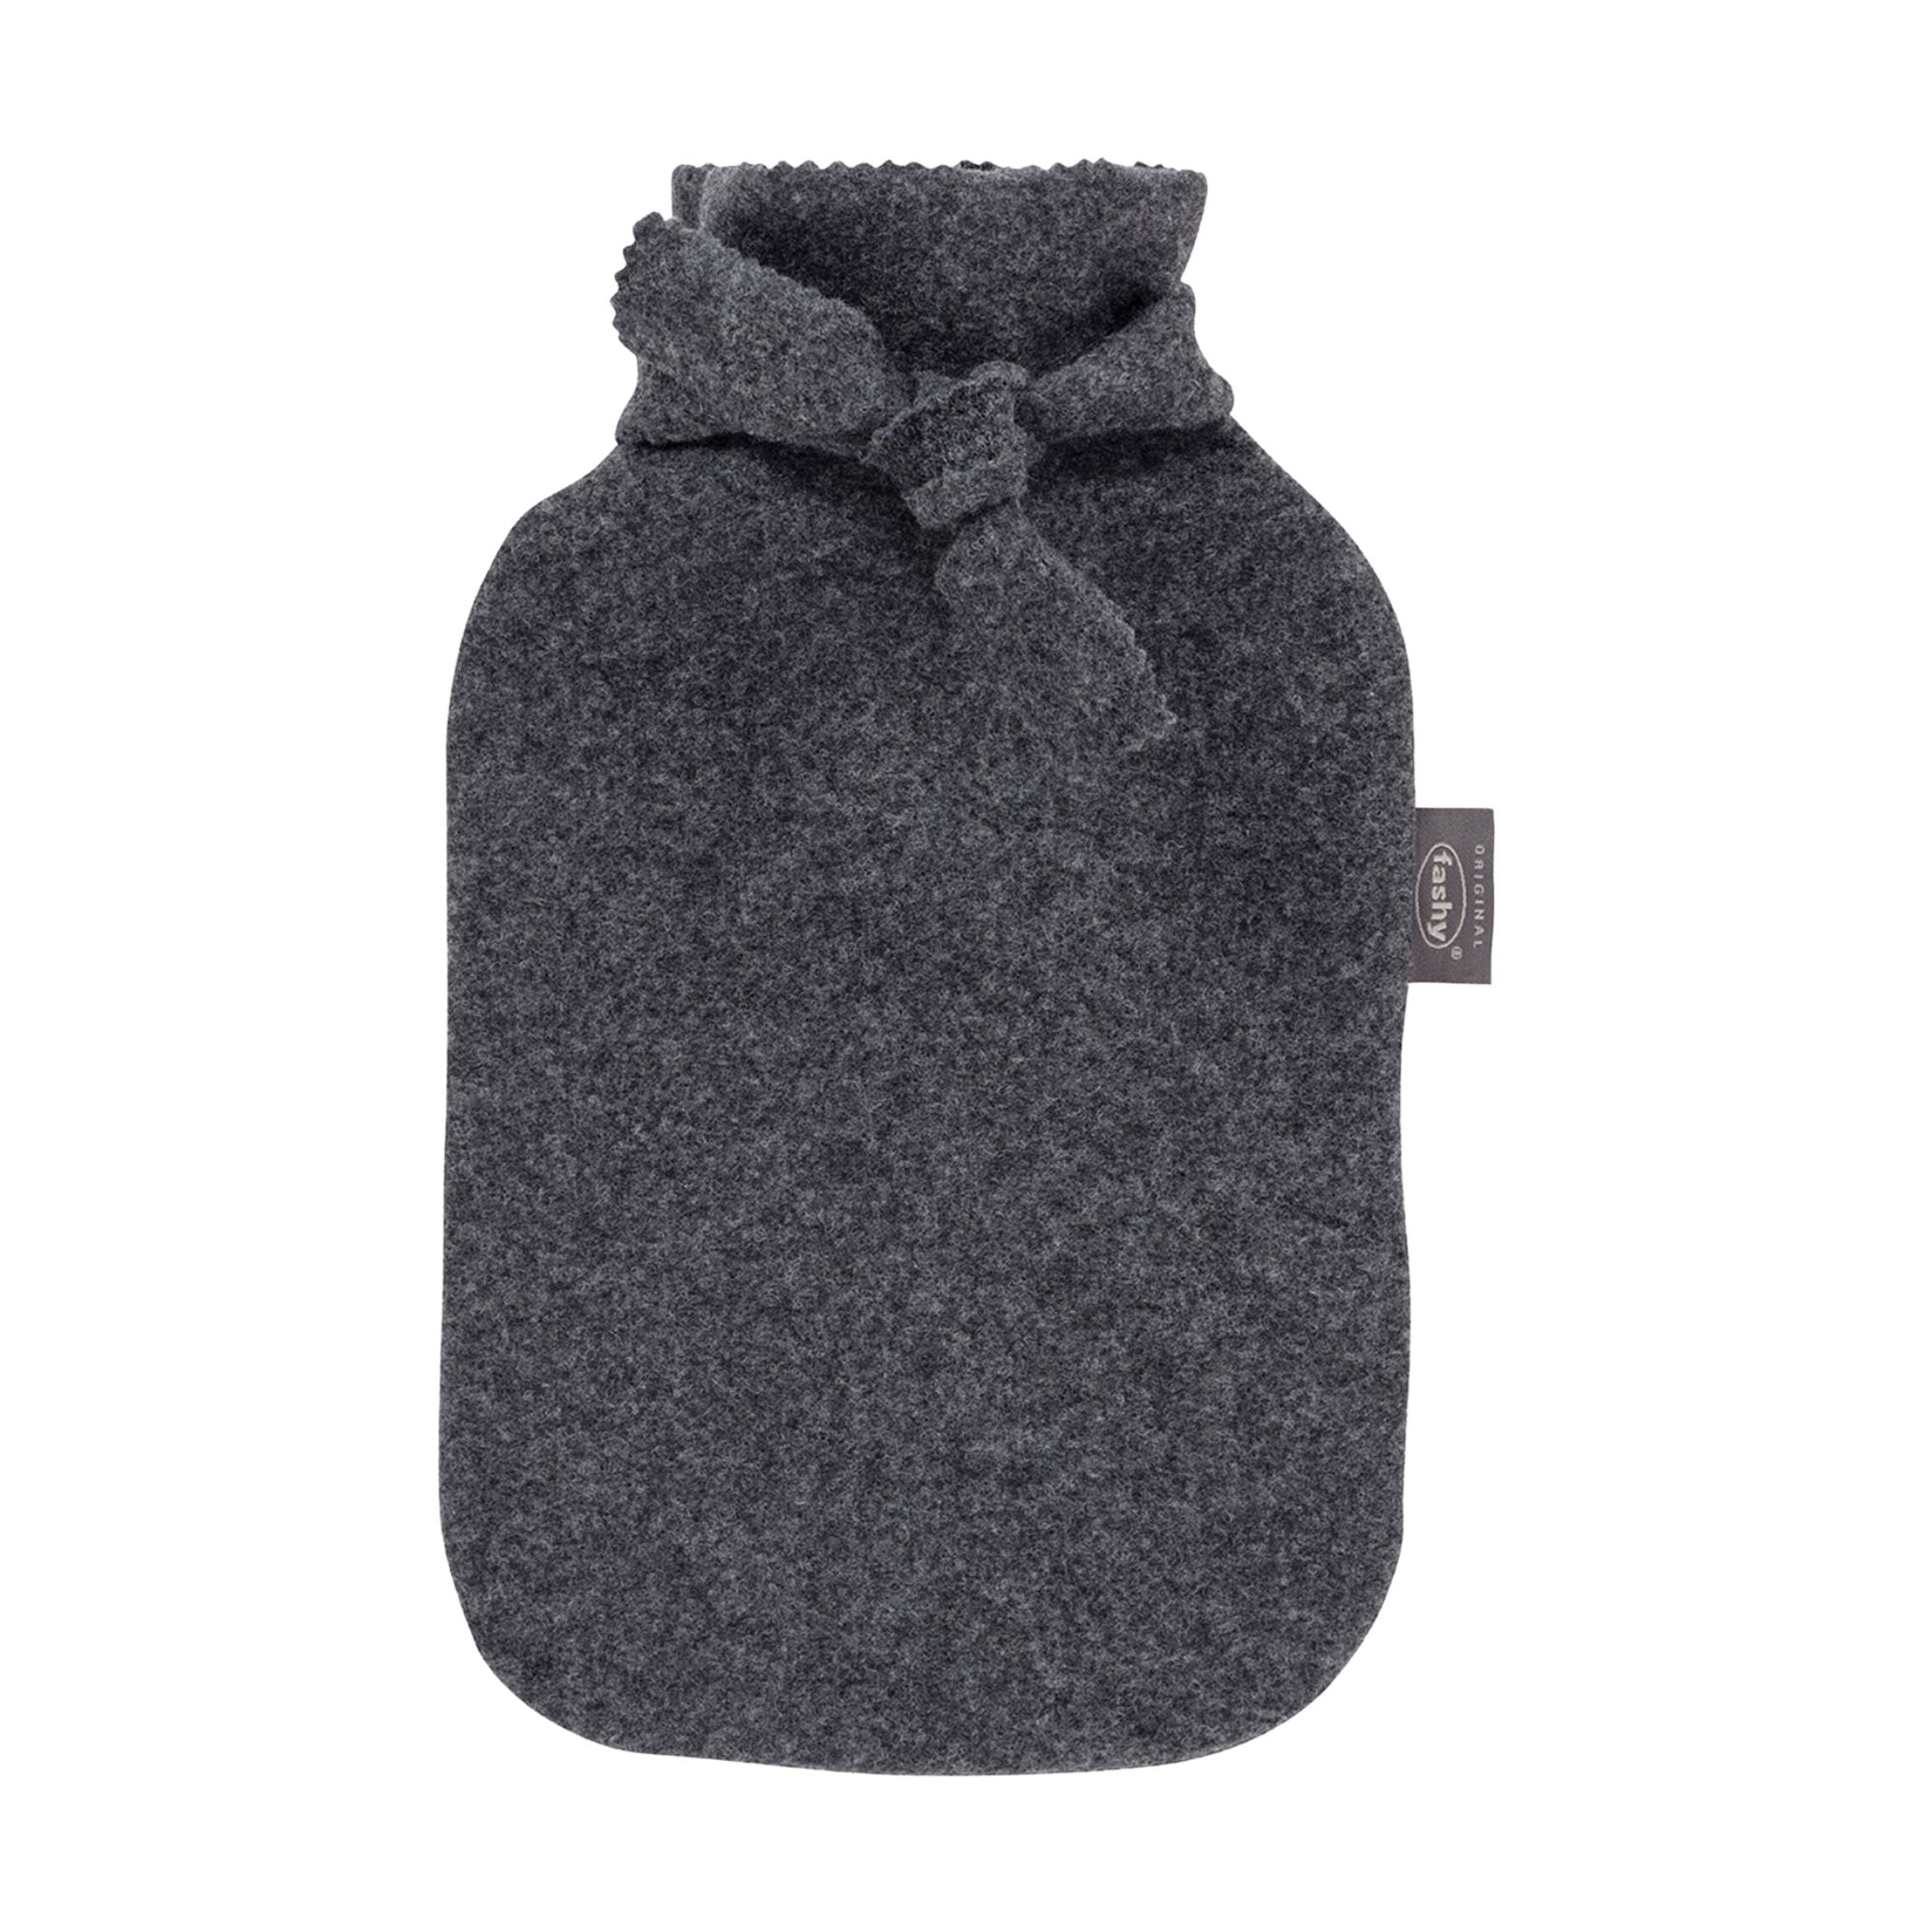 2 Litre Fashy Hot Water Bottle with a Premium Dark Grey Tie Cover